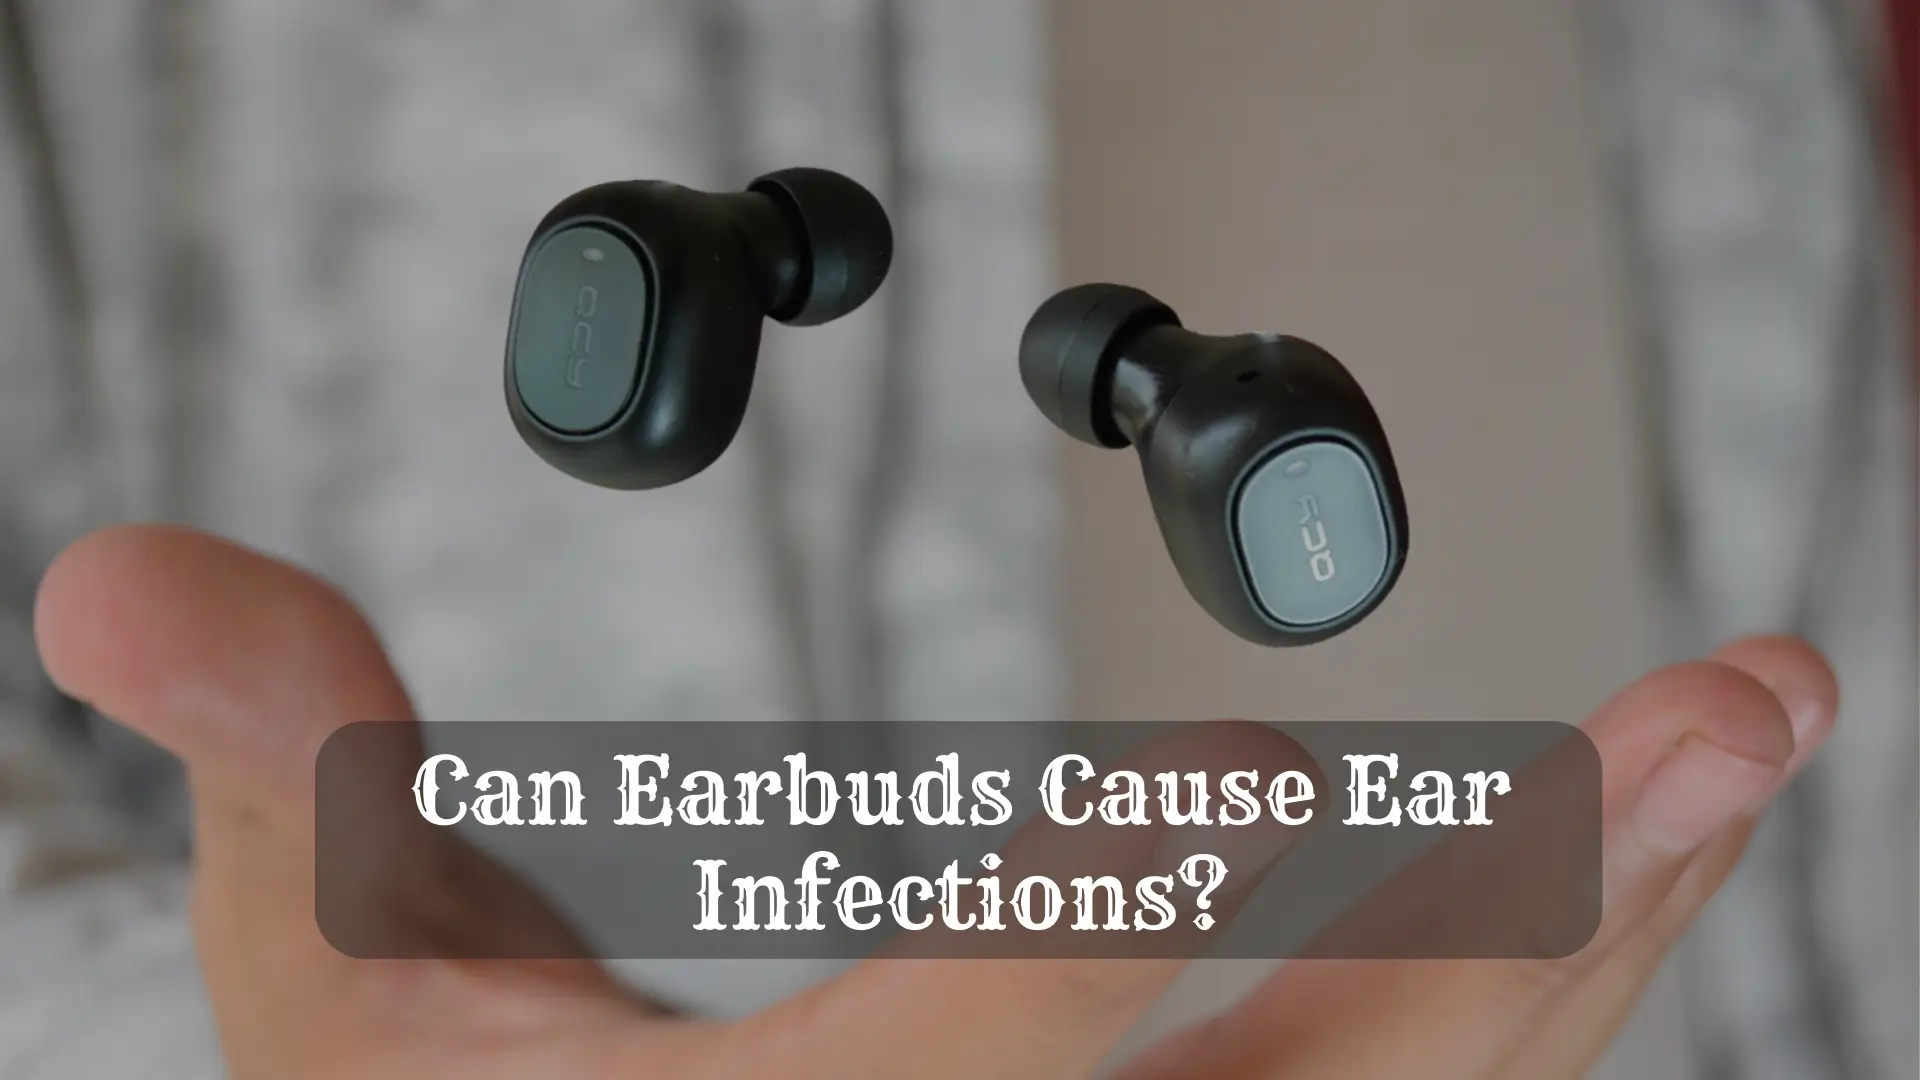 A Complete Guide on Can Earbuds Cause Ear Infections